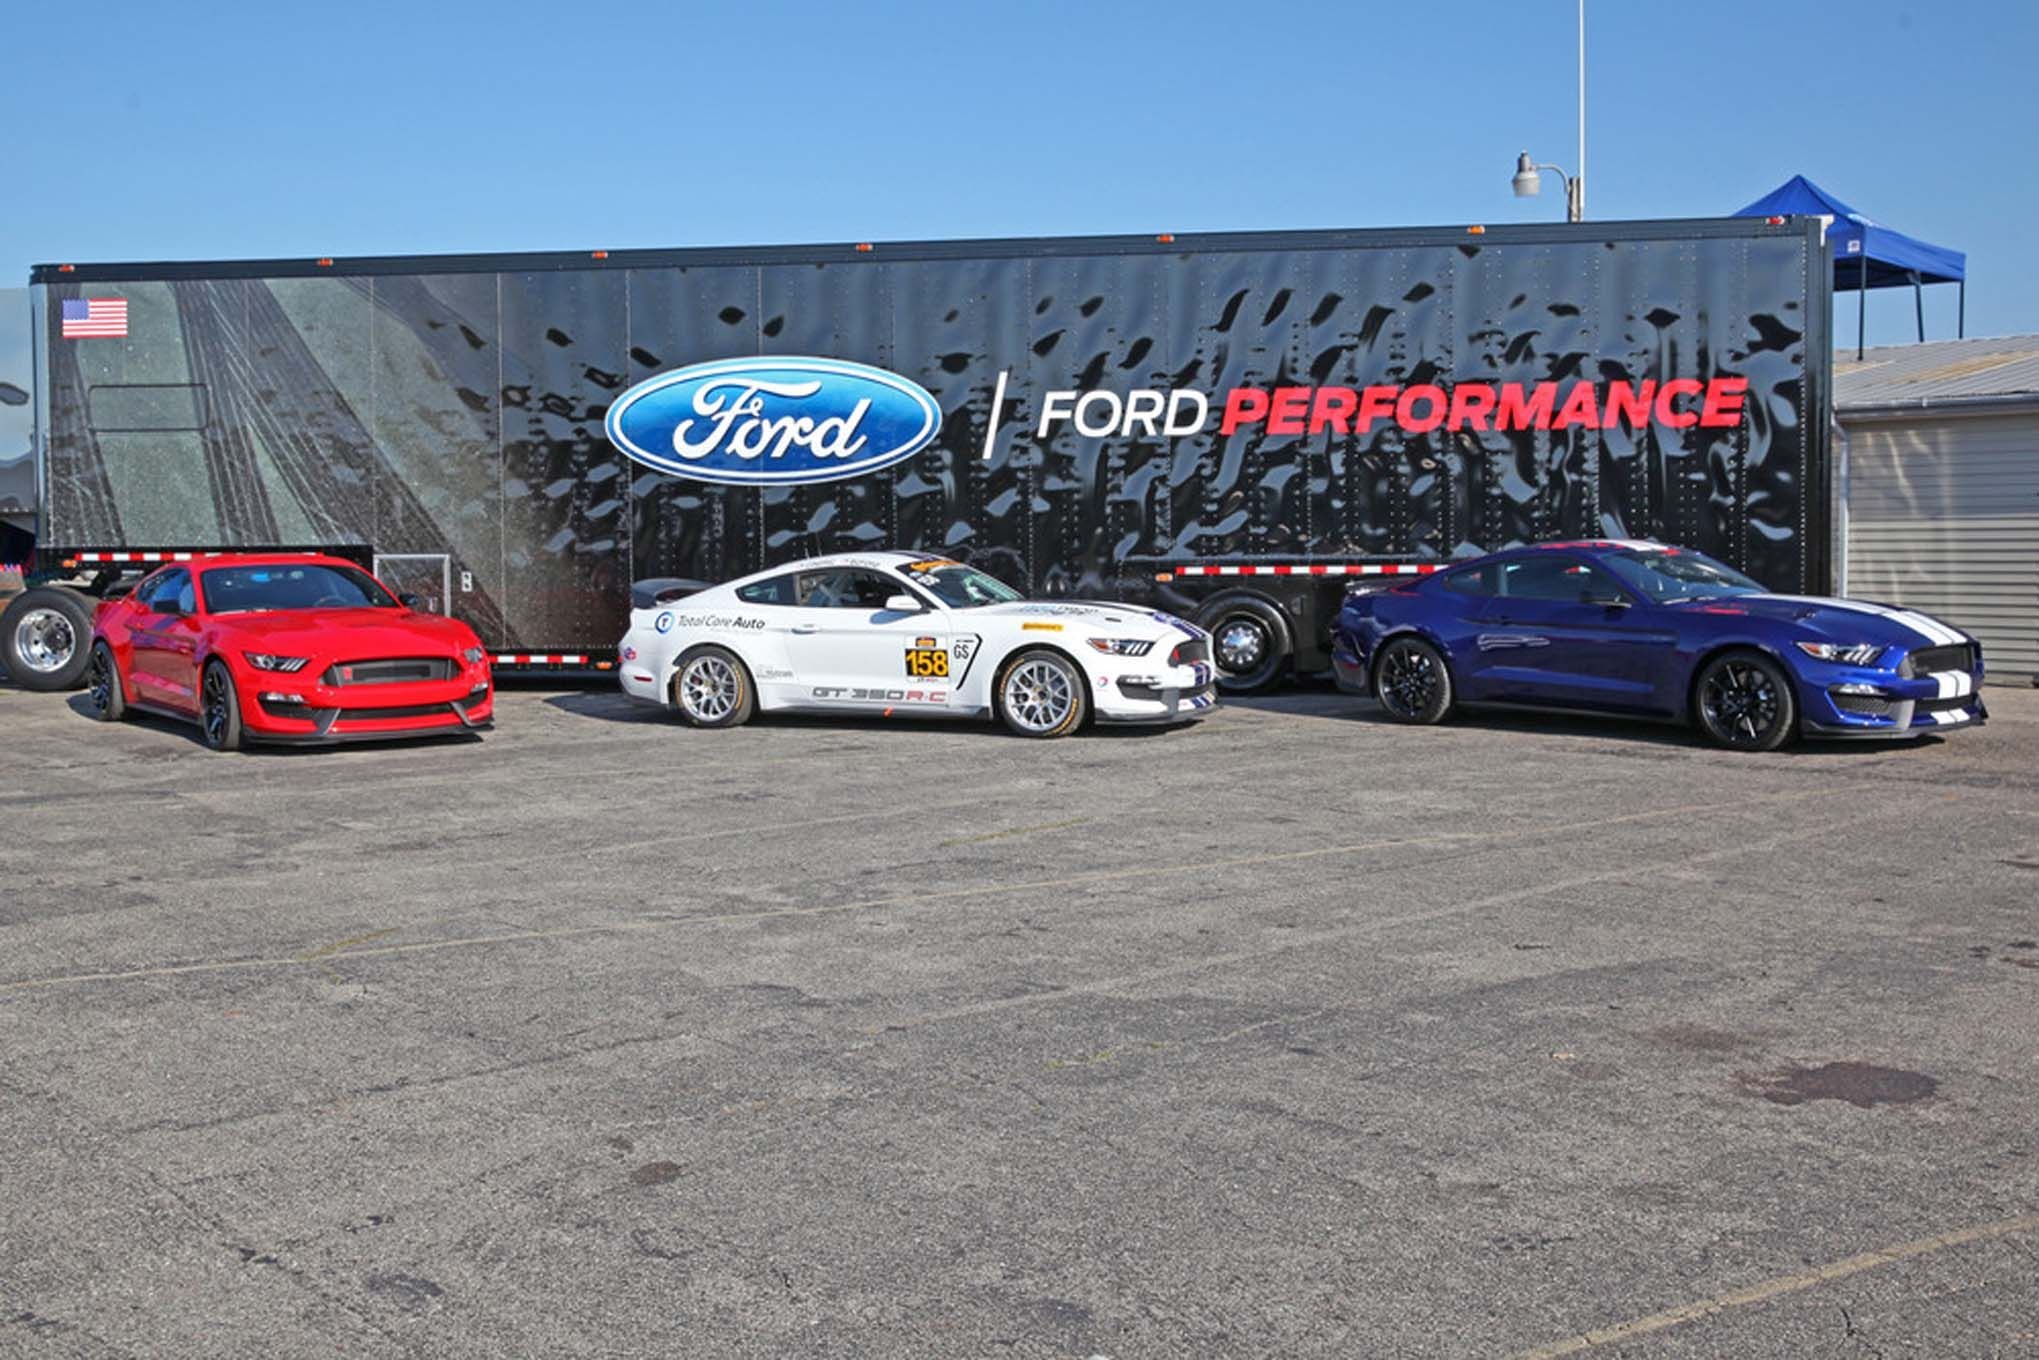 2014, Ford, Mustang, Shelby, Gt350r, Muscle, Supercar, Usa,  02 Wallpaper